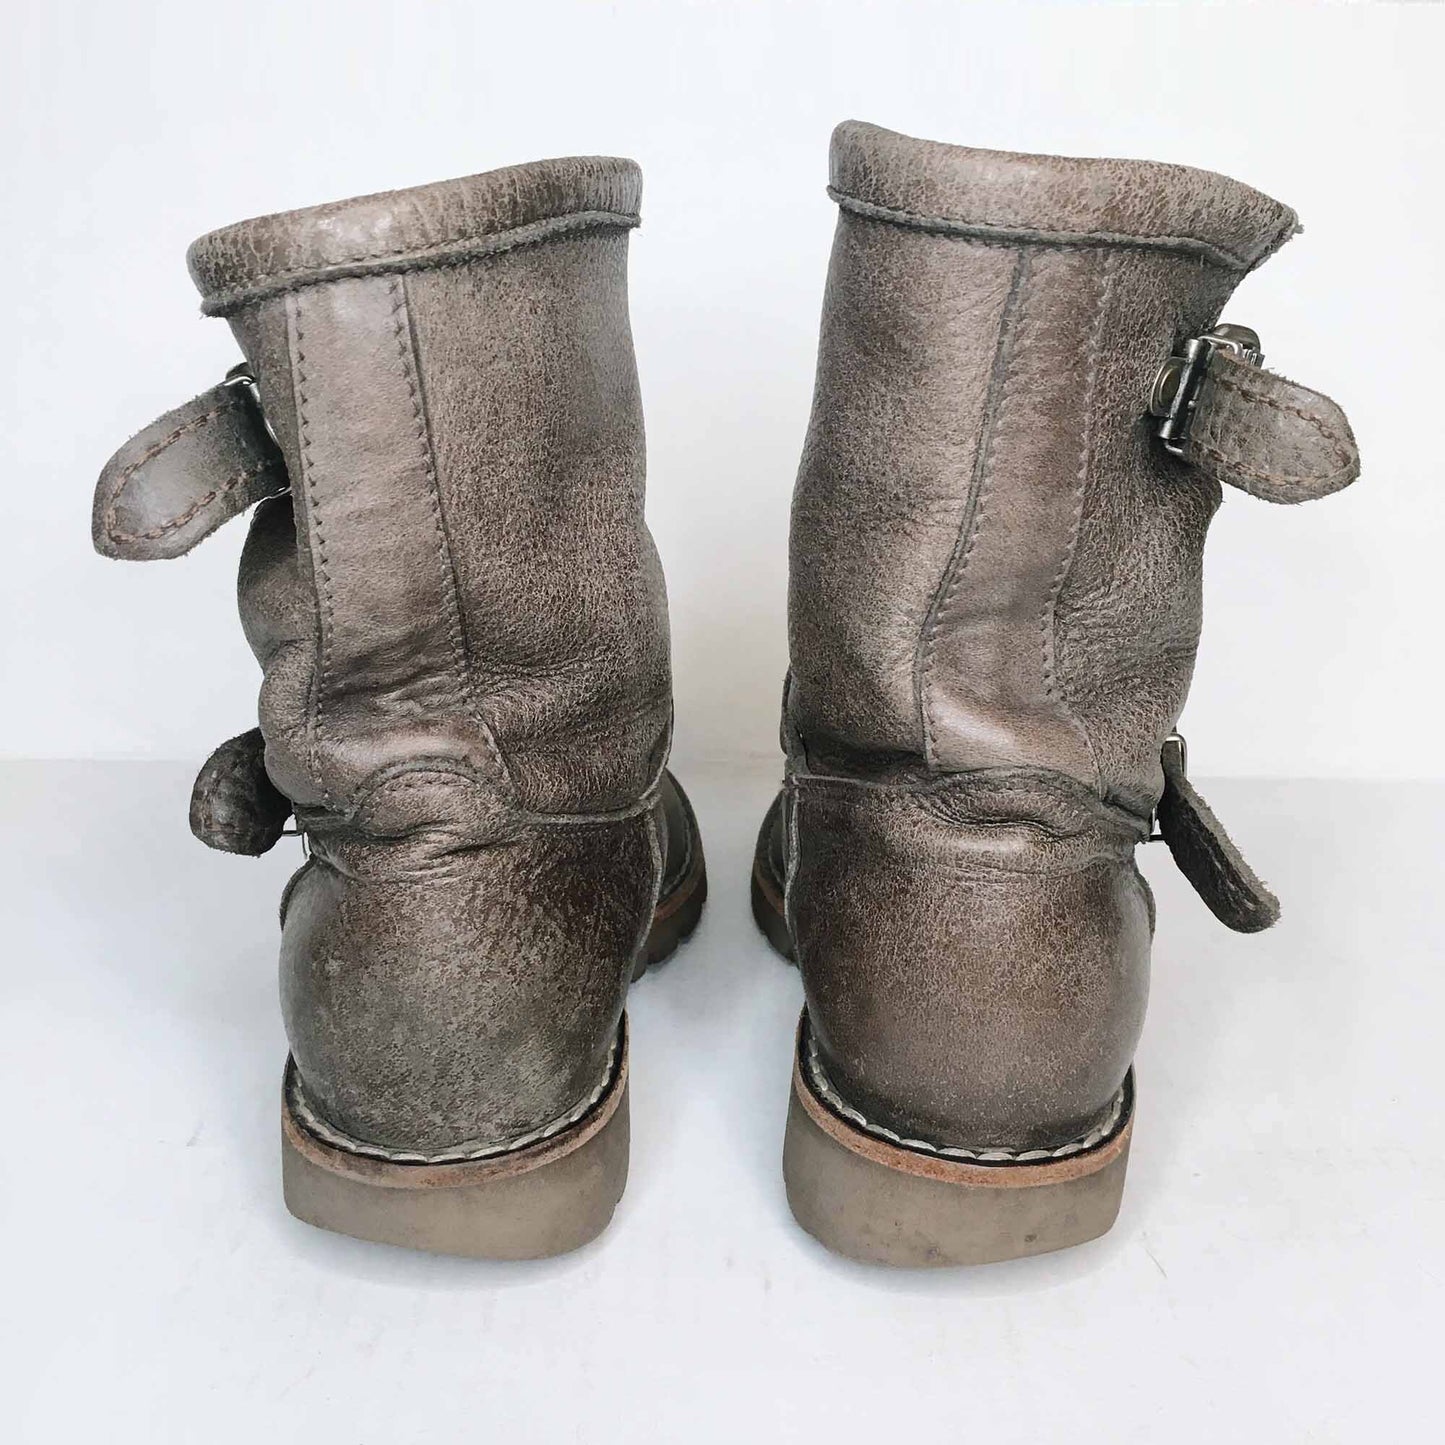 Roots leather buckle mid boot - size 6.5